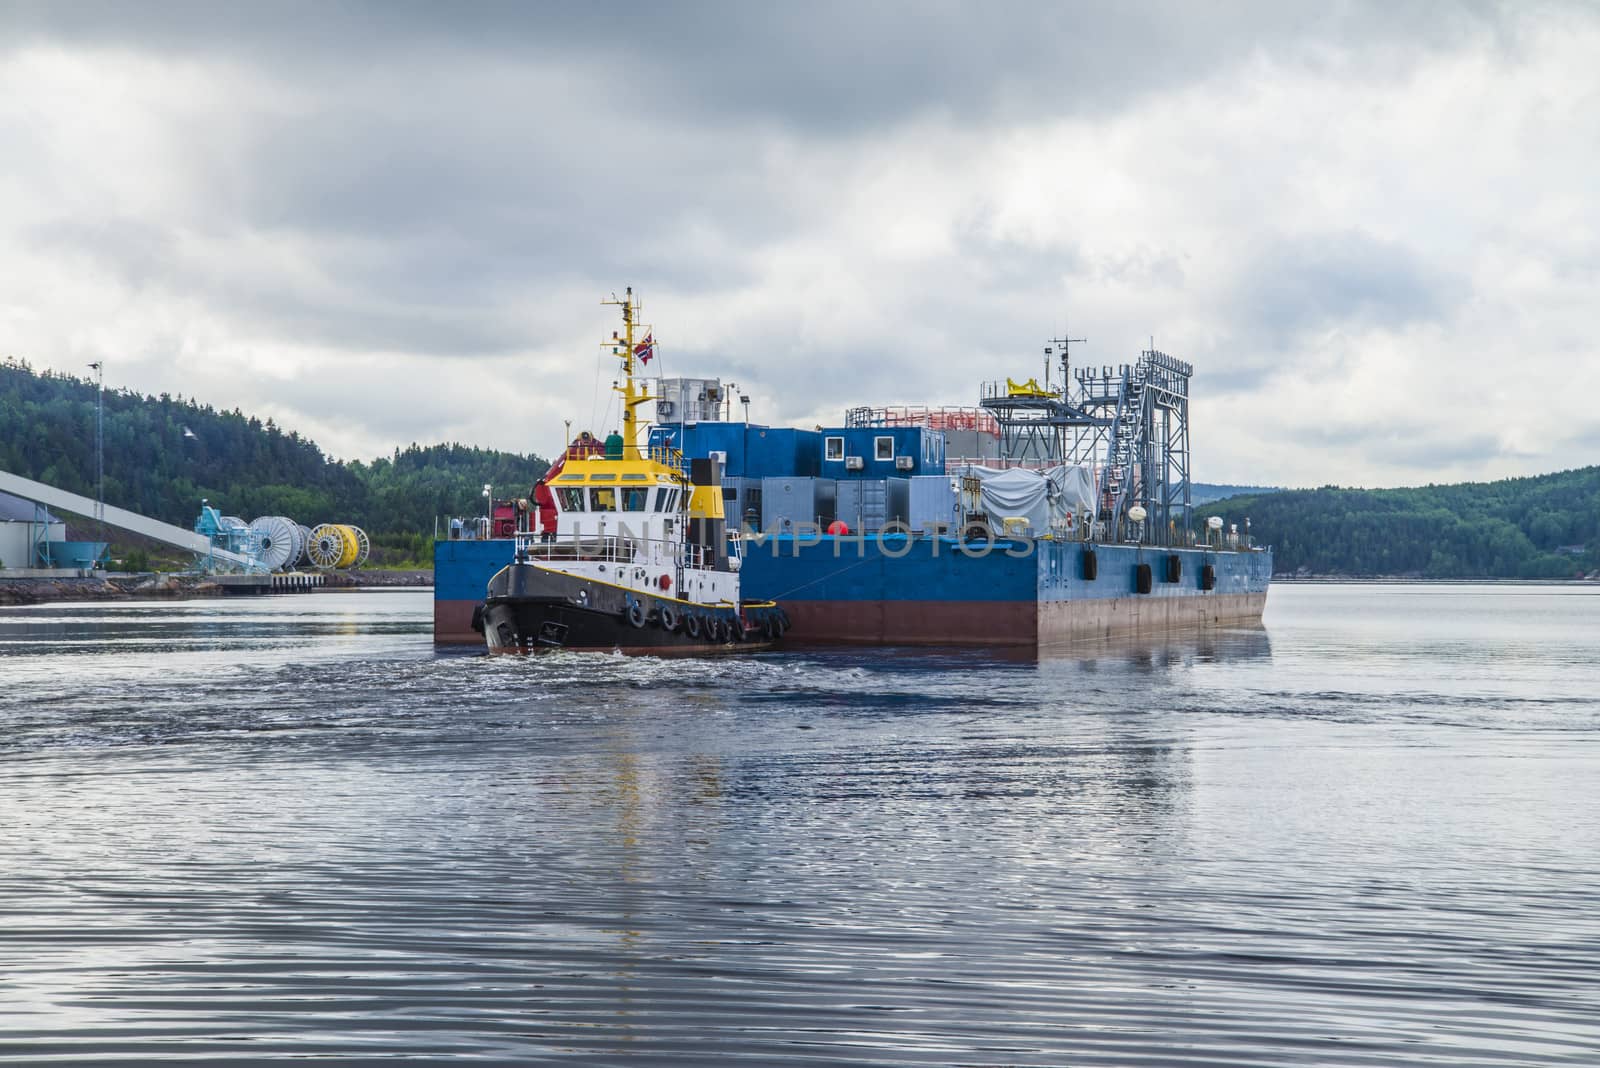 Eide Barge is towed from the pier at Halden harbor to the quay at Nexans Norway.